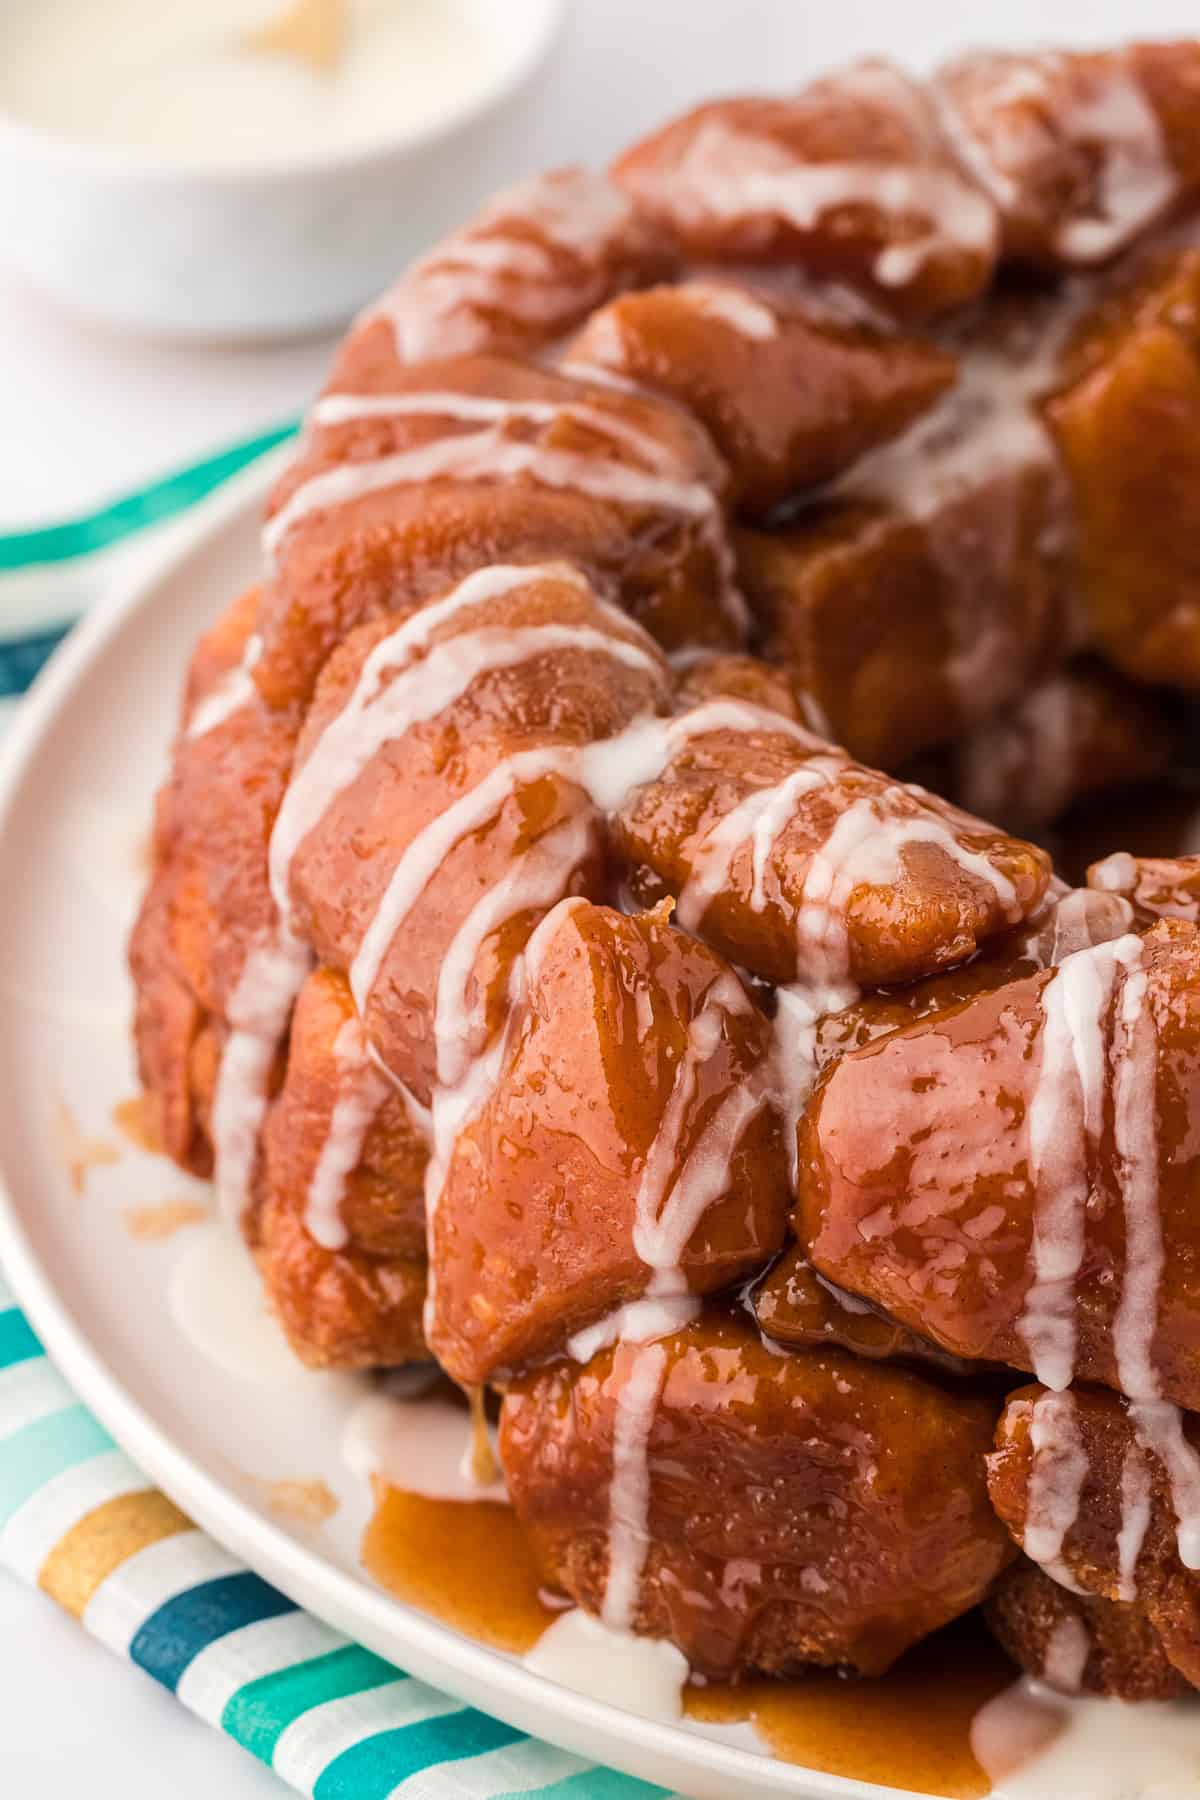 monkey bread on a white plate on a top of a gold, teal and blue striped kitchen towel